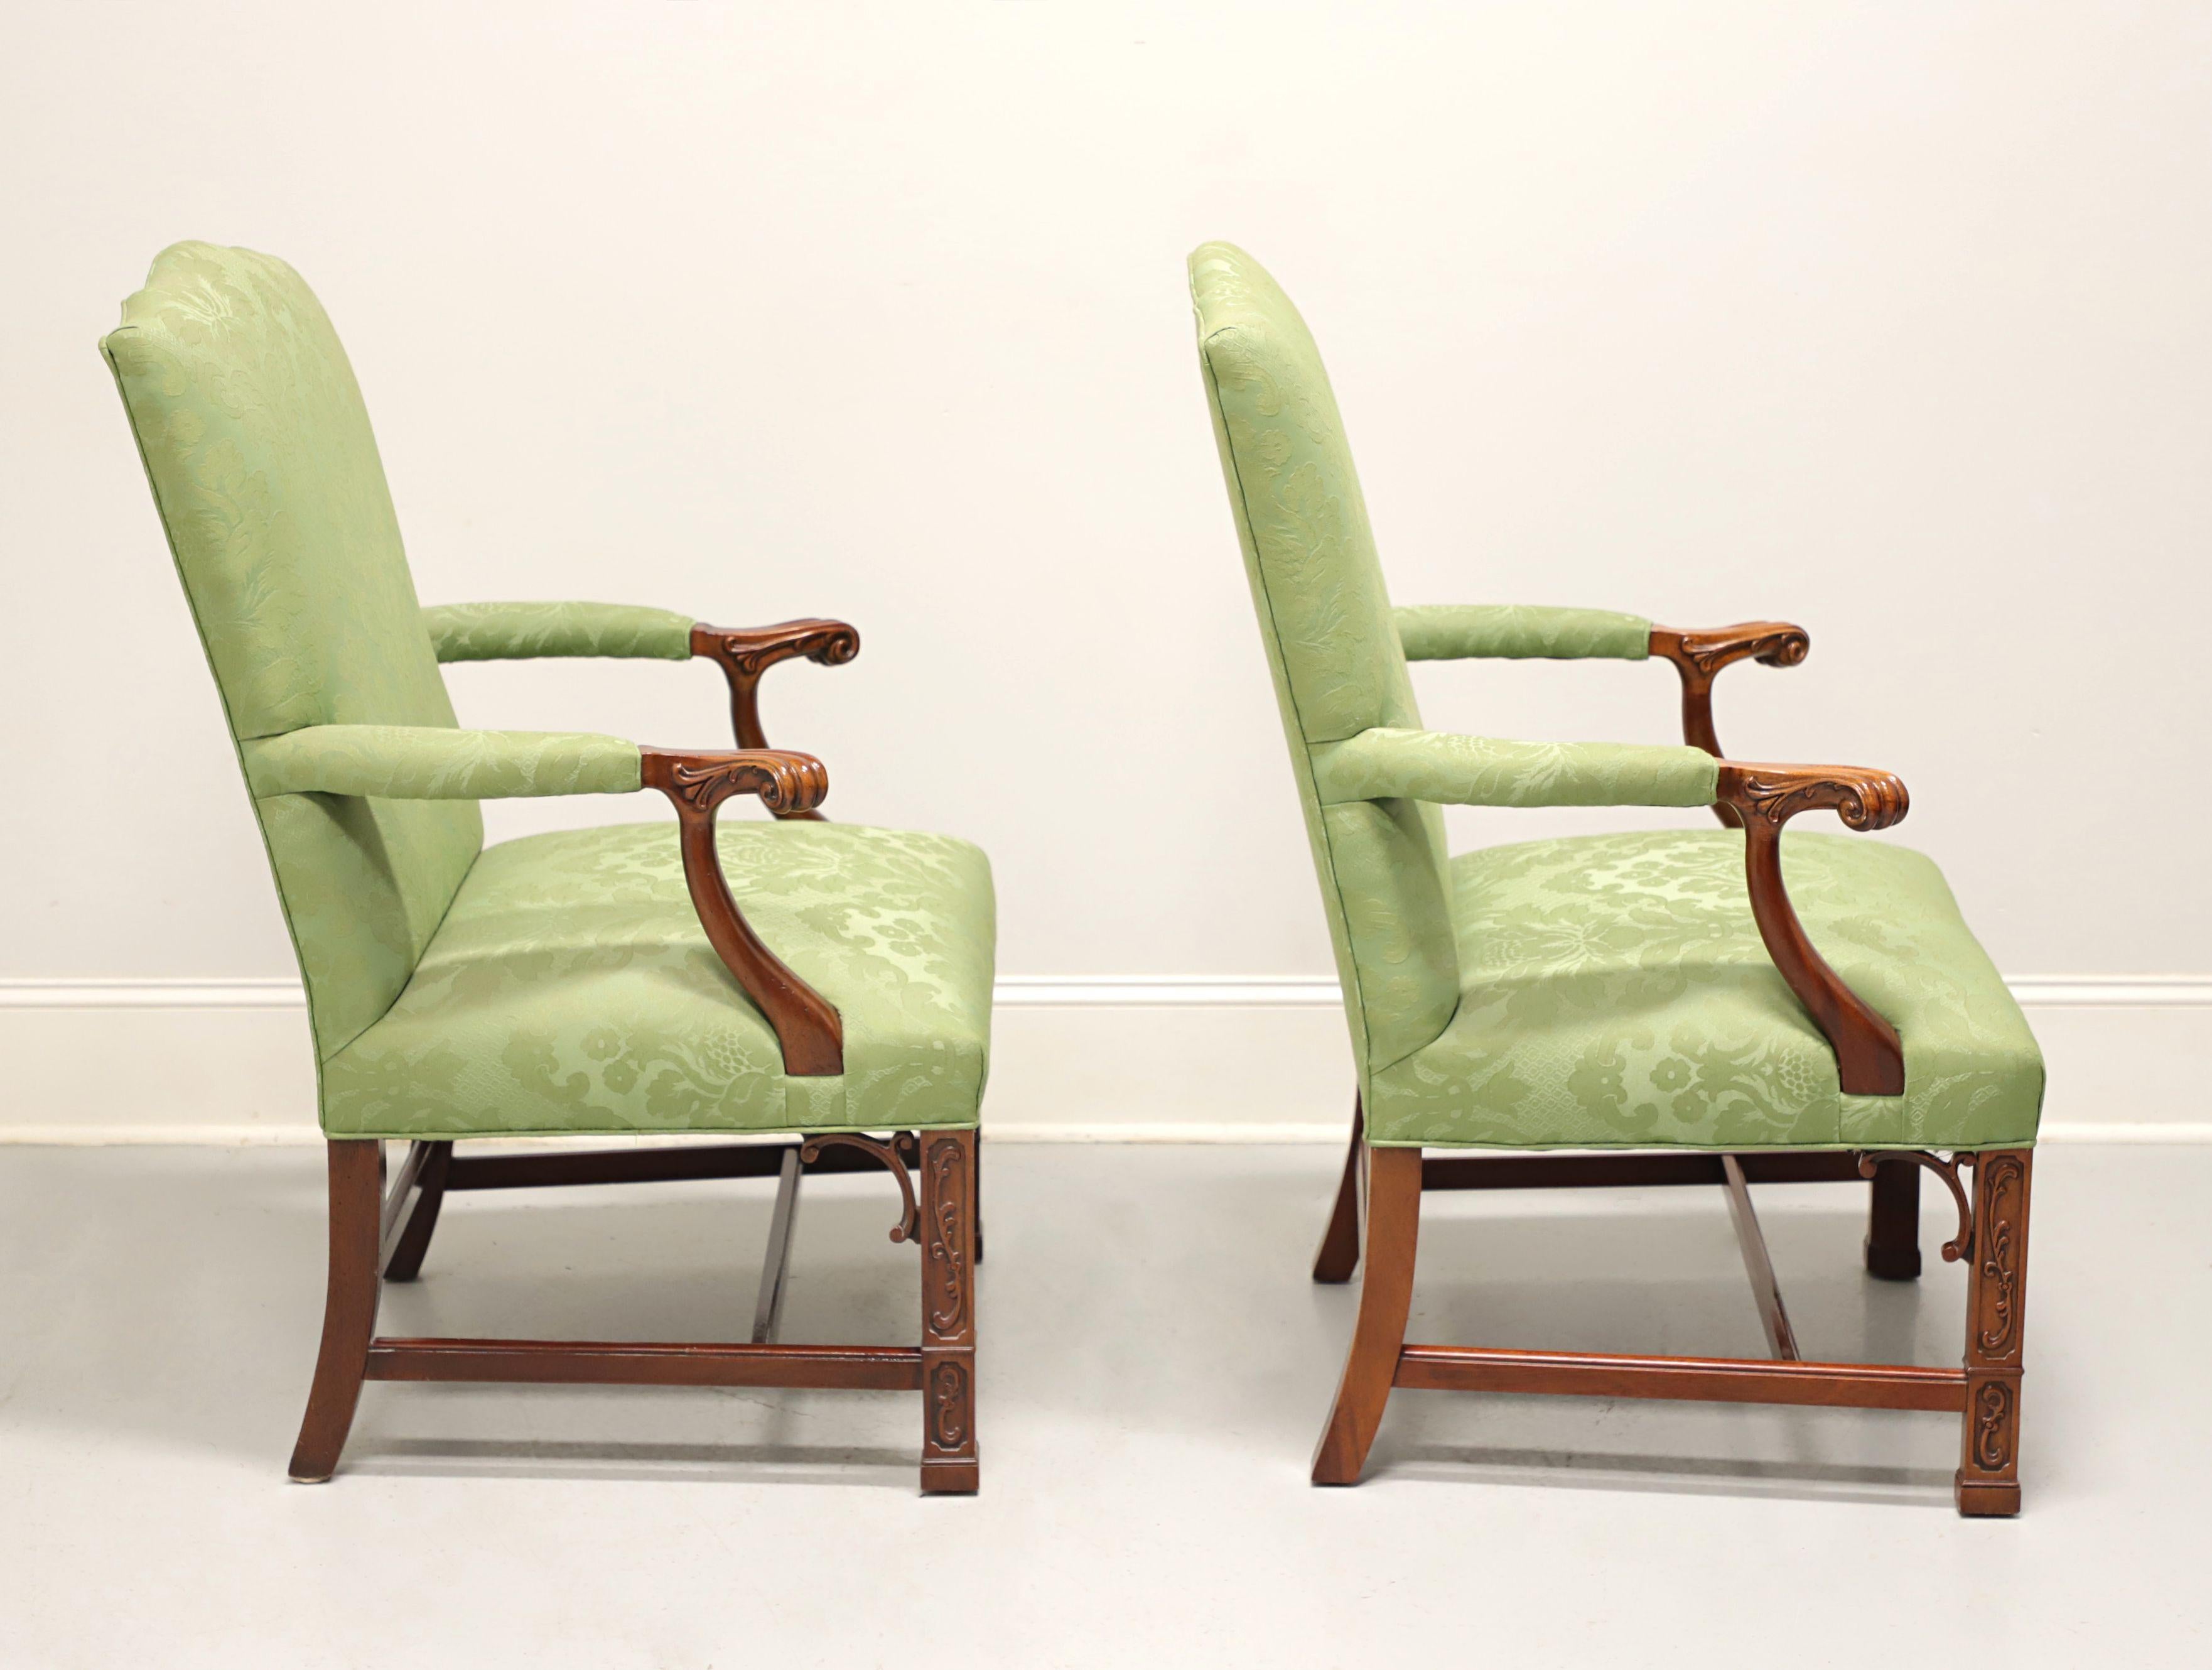 SOUTHWOOD Gainsborough Mahogany Chippendale Style Fretwork Armchairs - Pair In Good Condition For Sale In Charlotte, NC